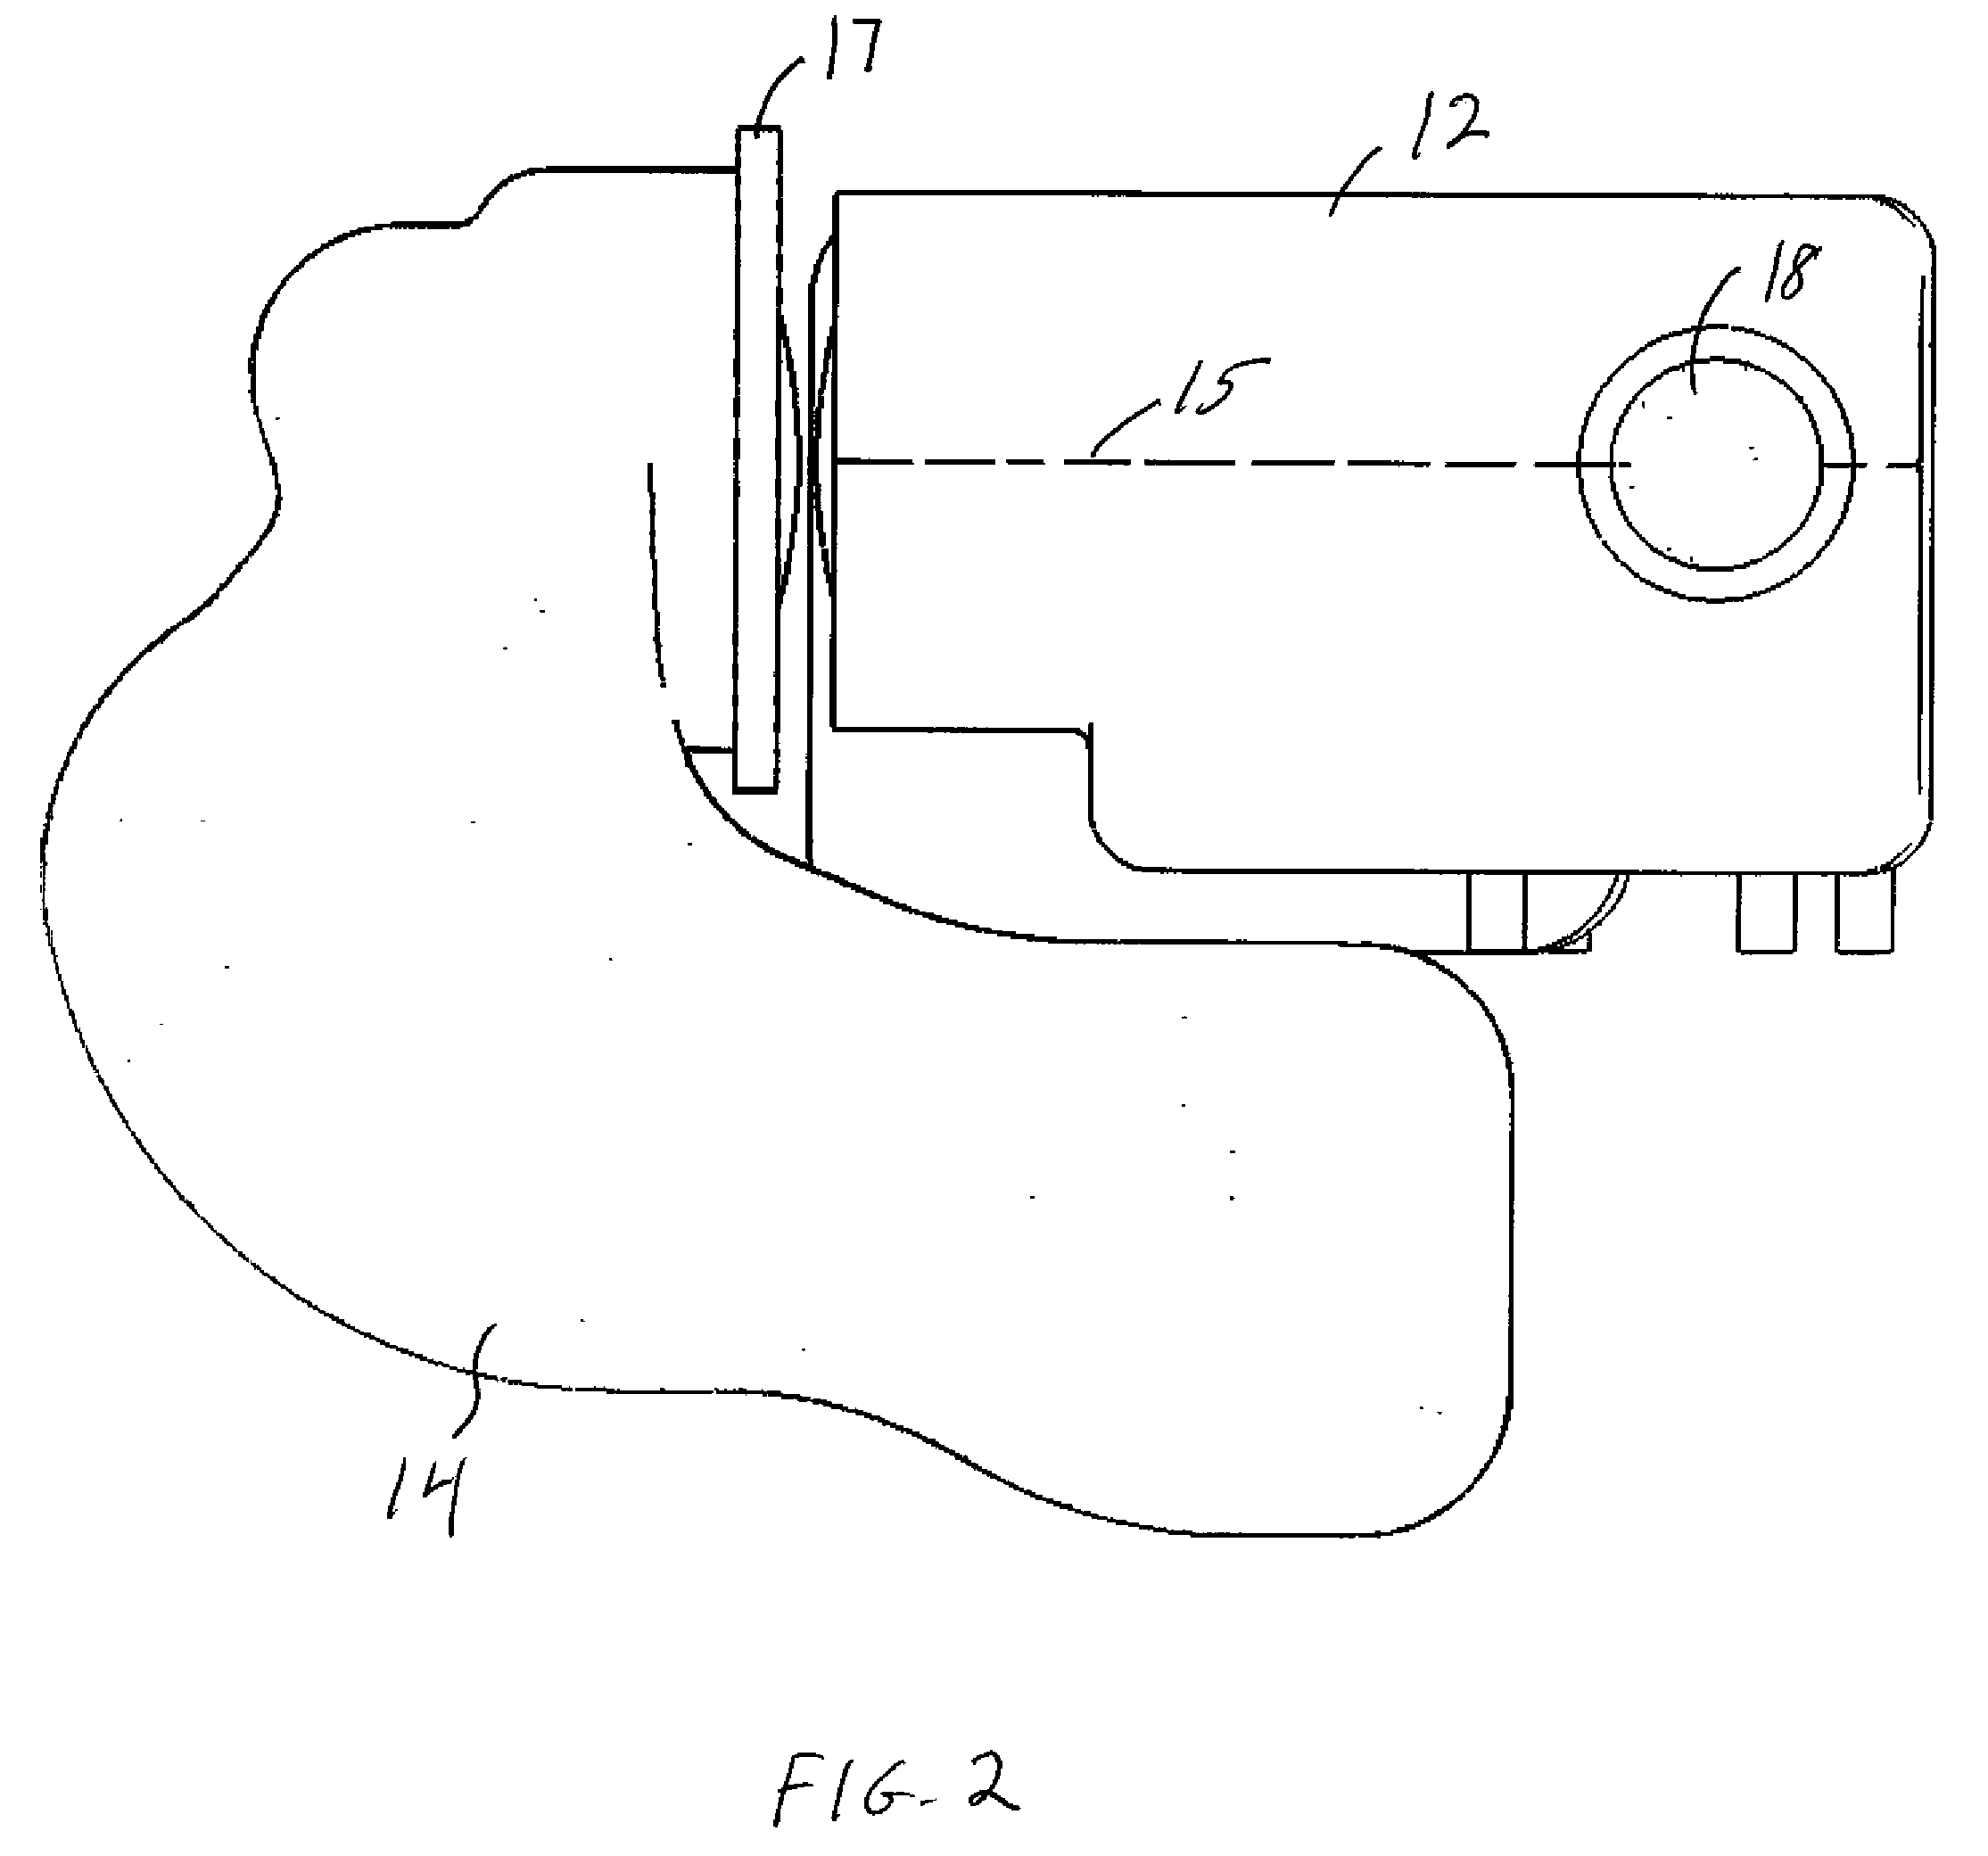 Portable digital medical camera for capturing images of the retina or the external auditory canal, and methods of use